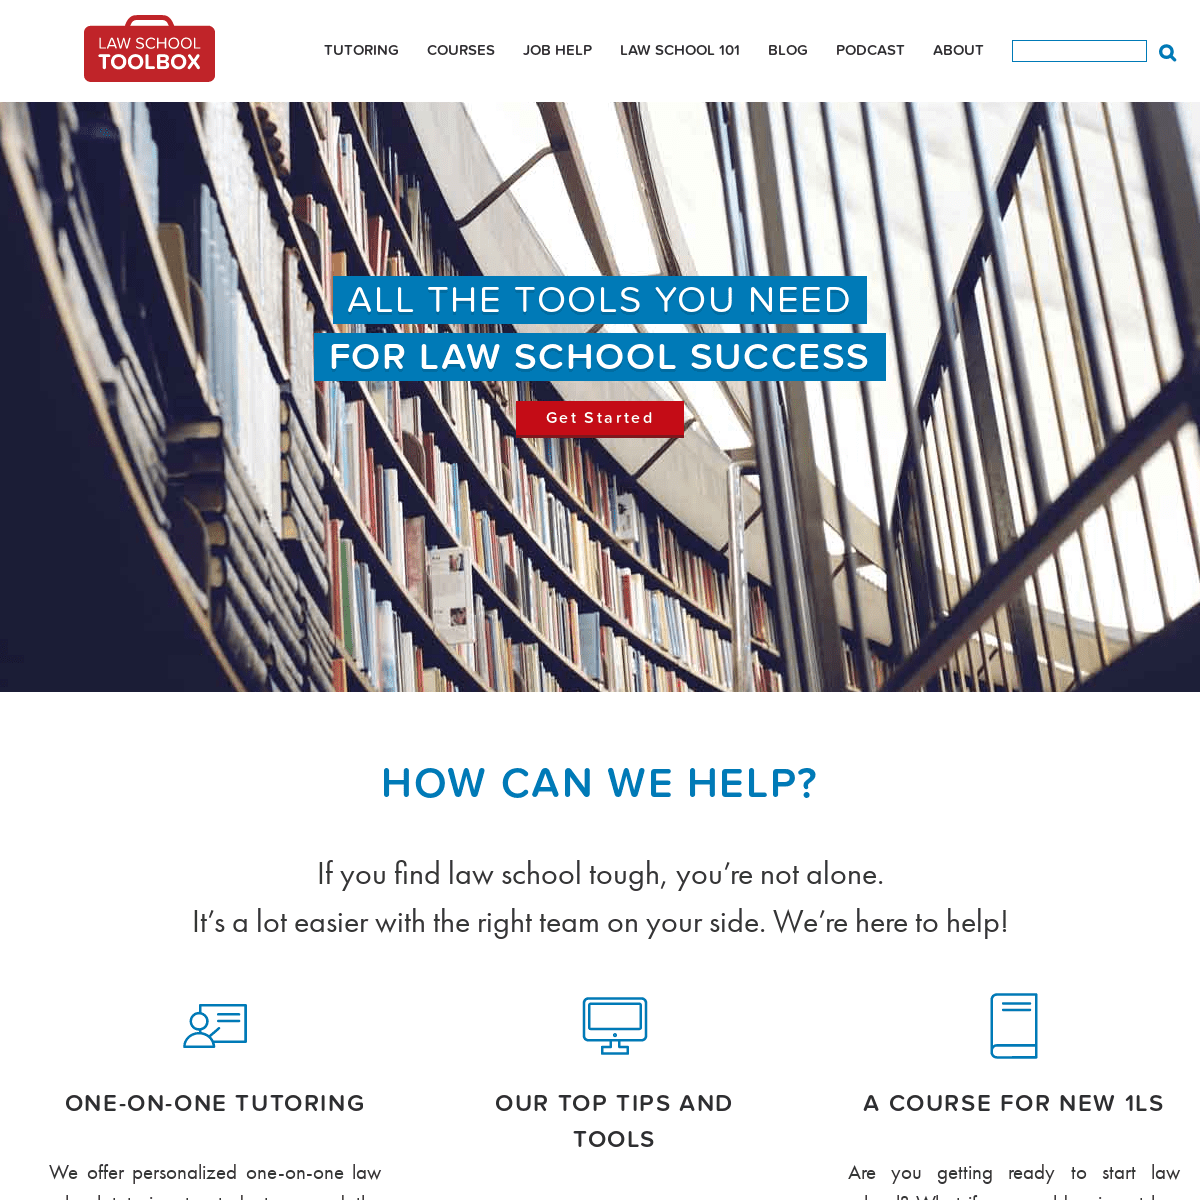 A complete backup of lawschooltoolbox.com